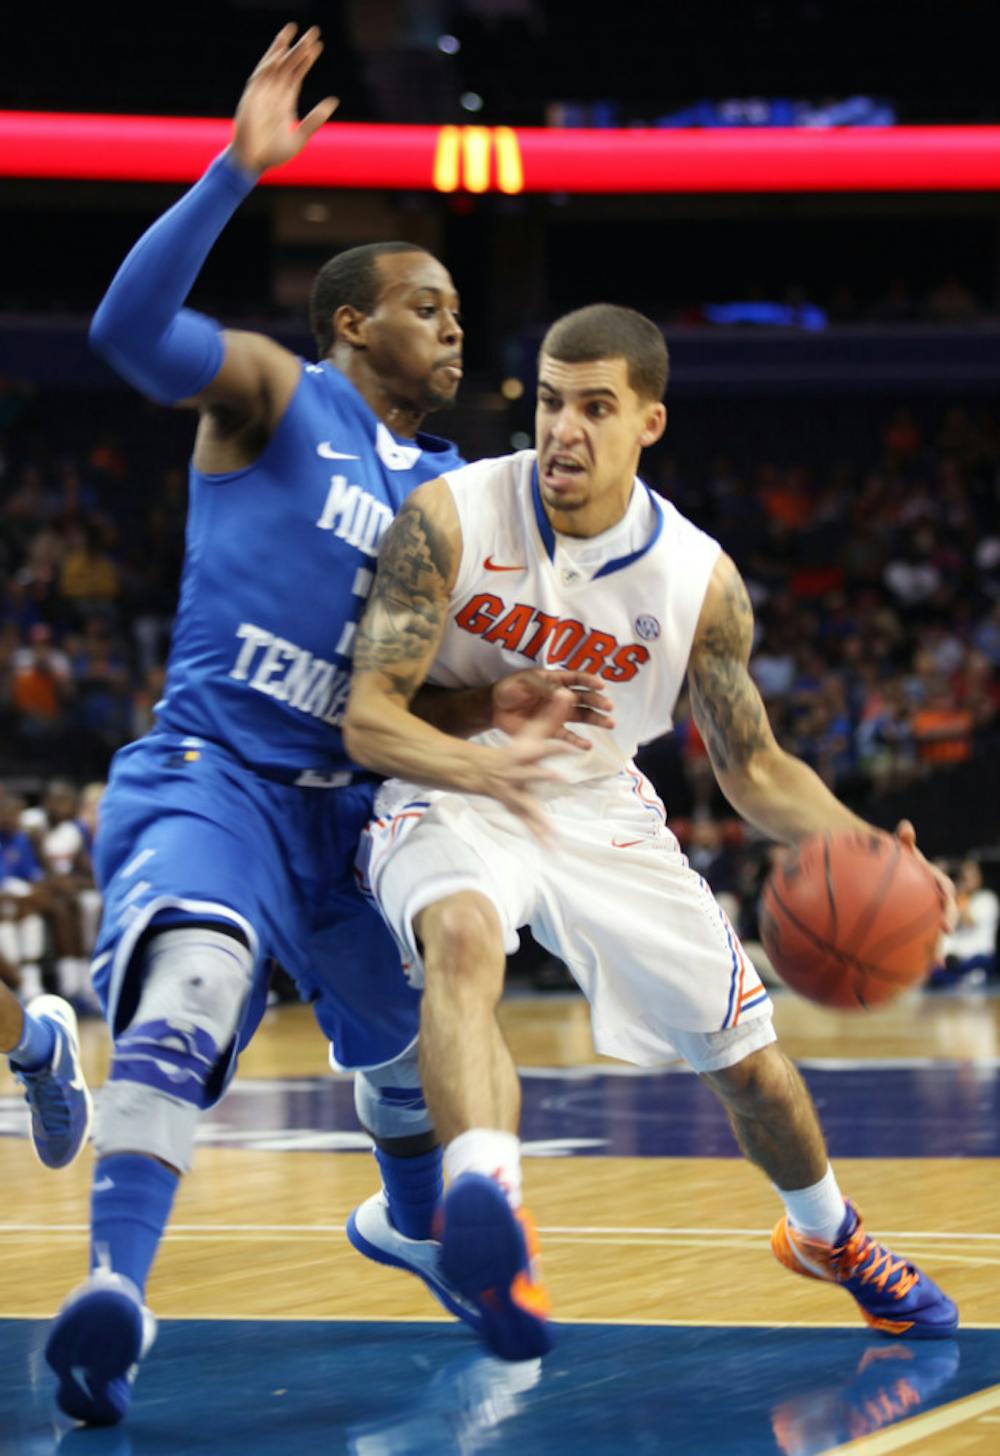 <p><span>Guard Scottie Wilbekin (5) drives against Middle Tennessee in UF’s 66-45 win on Nov. 18 in Tampa.  </span></p>
<div><span><br /></span></div>